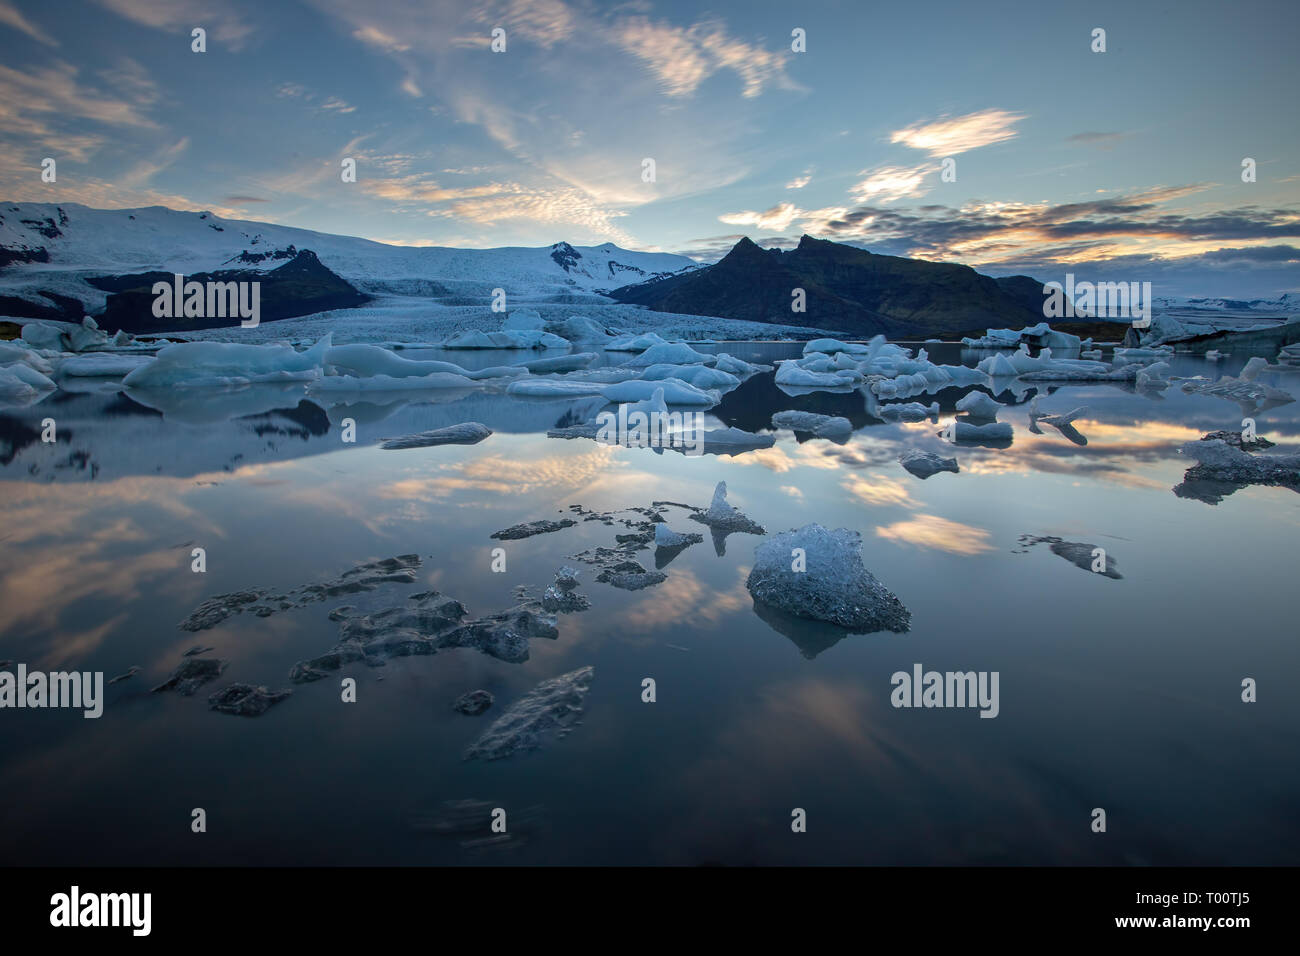 Arctic nature scenery of Jokulsarlon, glacier lagoon in Iceland at night with ice melting and floating in water. Stock Photo